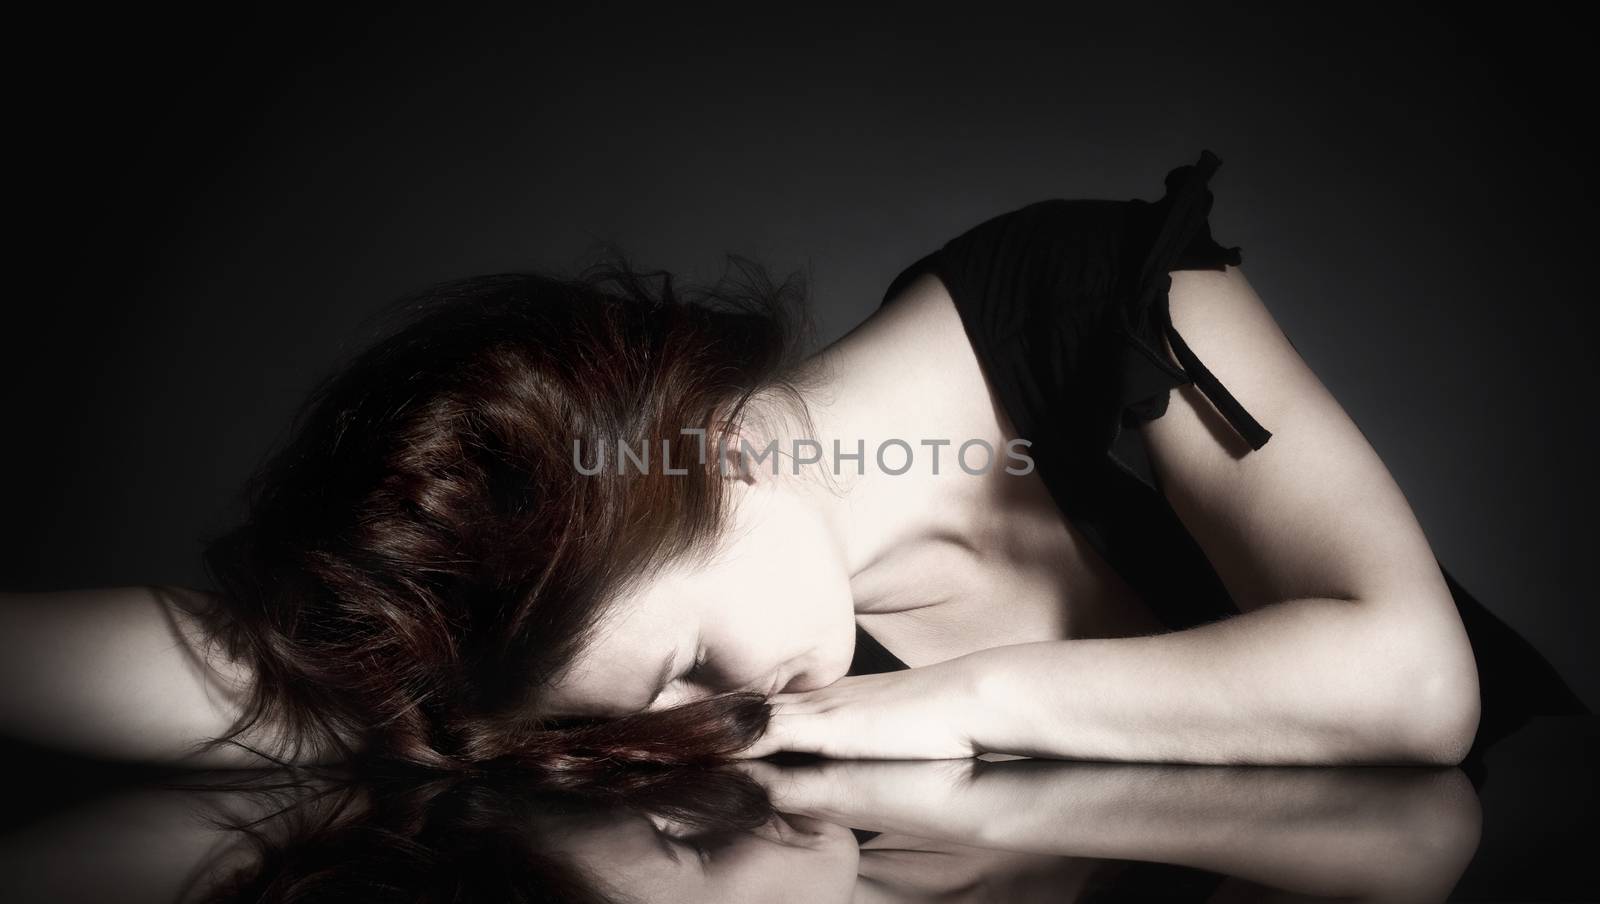 Woman with Closed Eyes Dreaming by courtyardpix